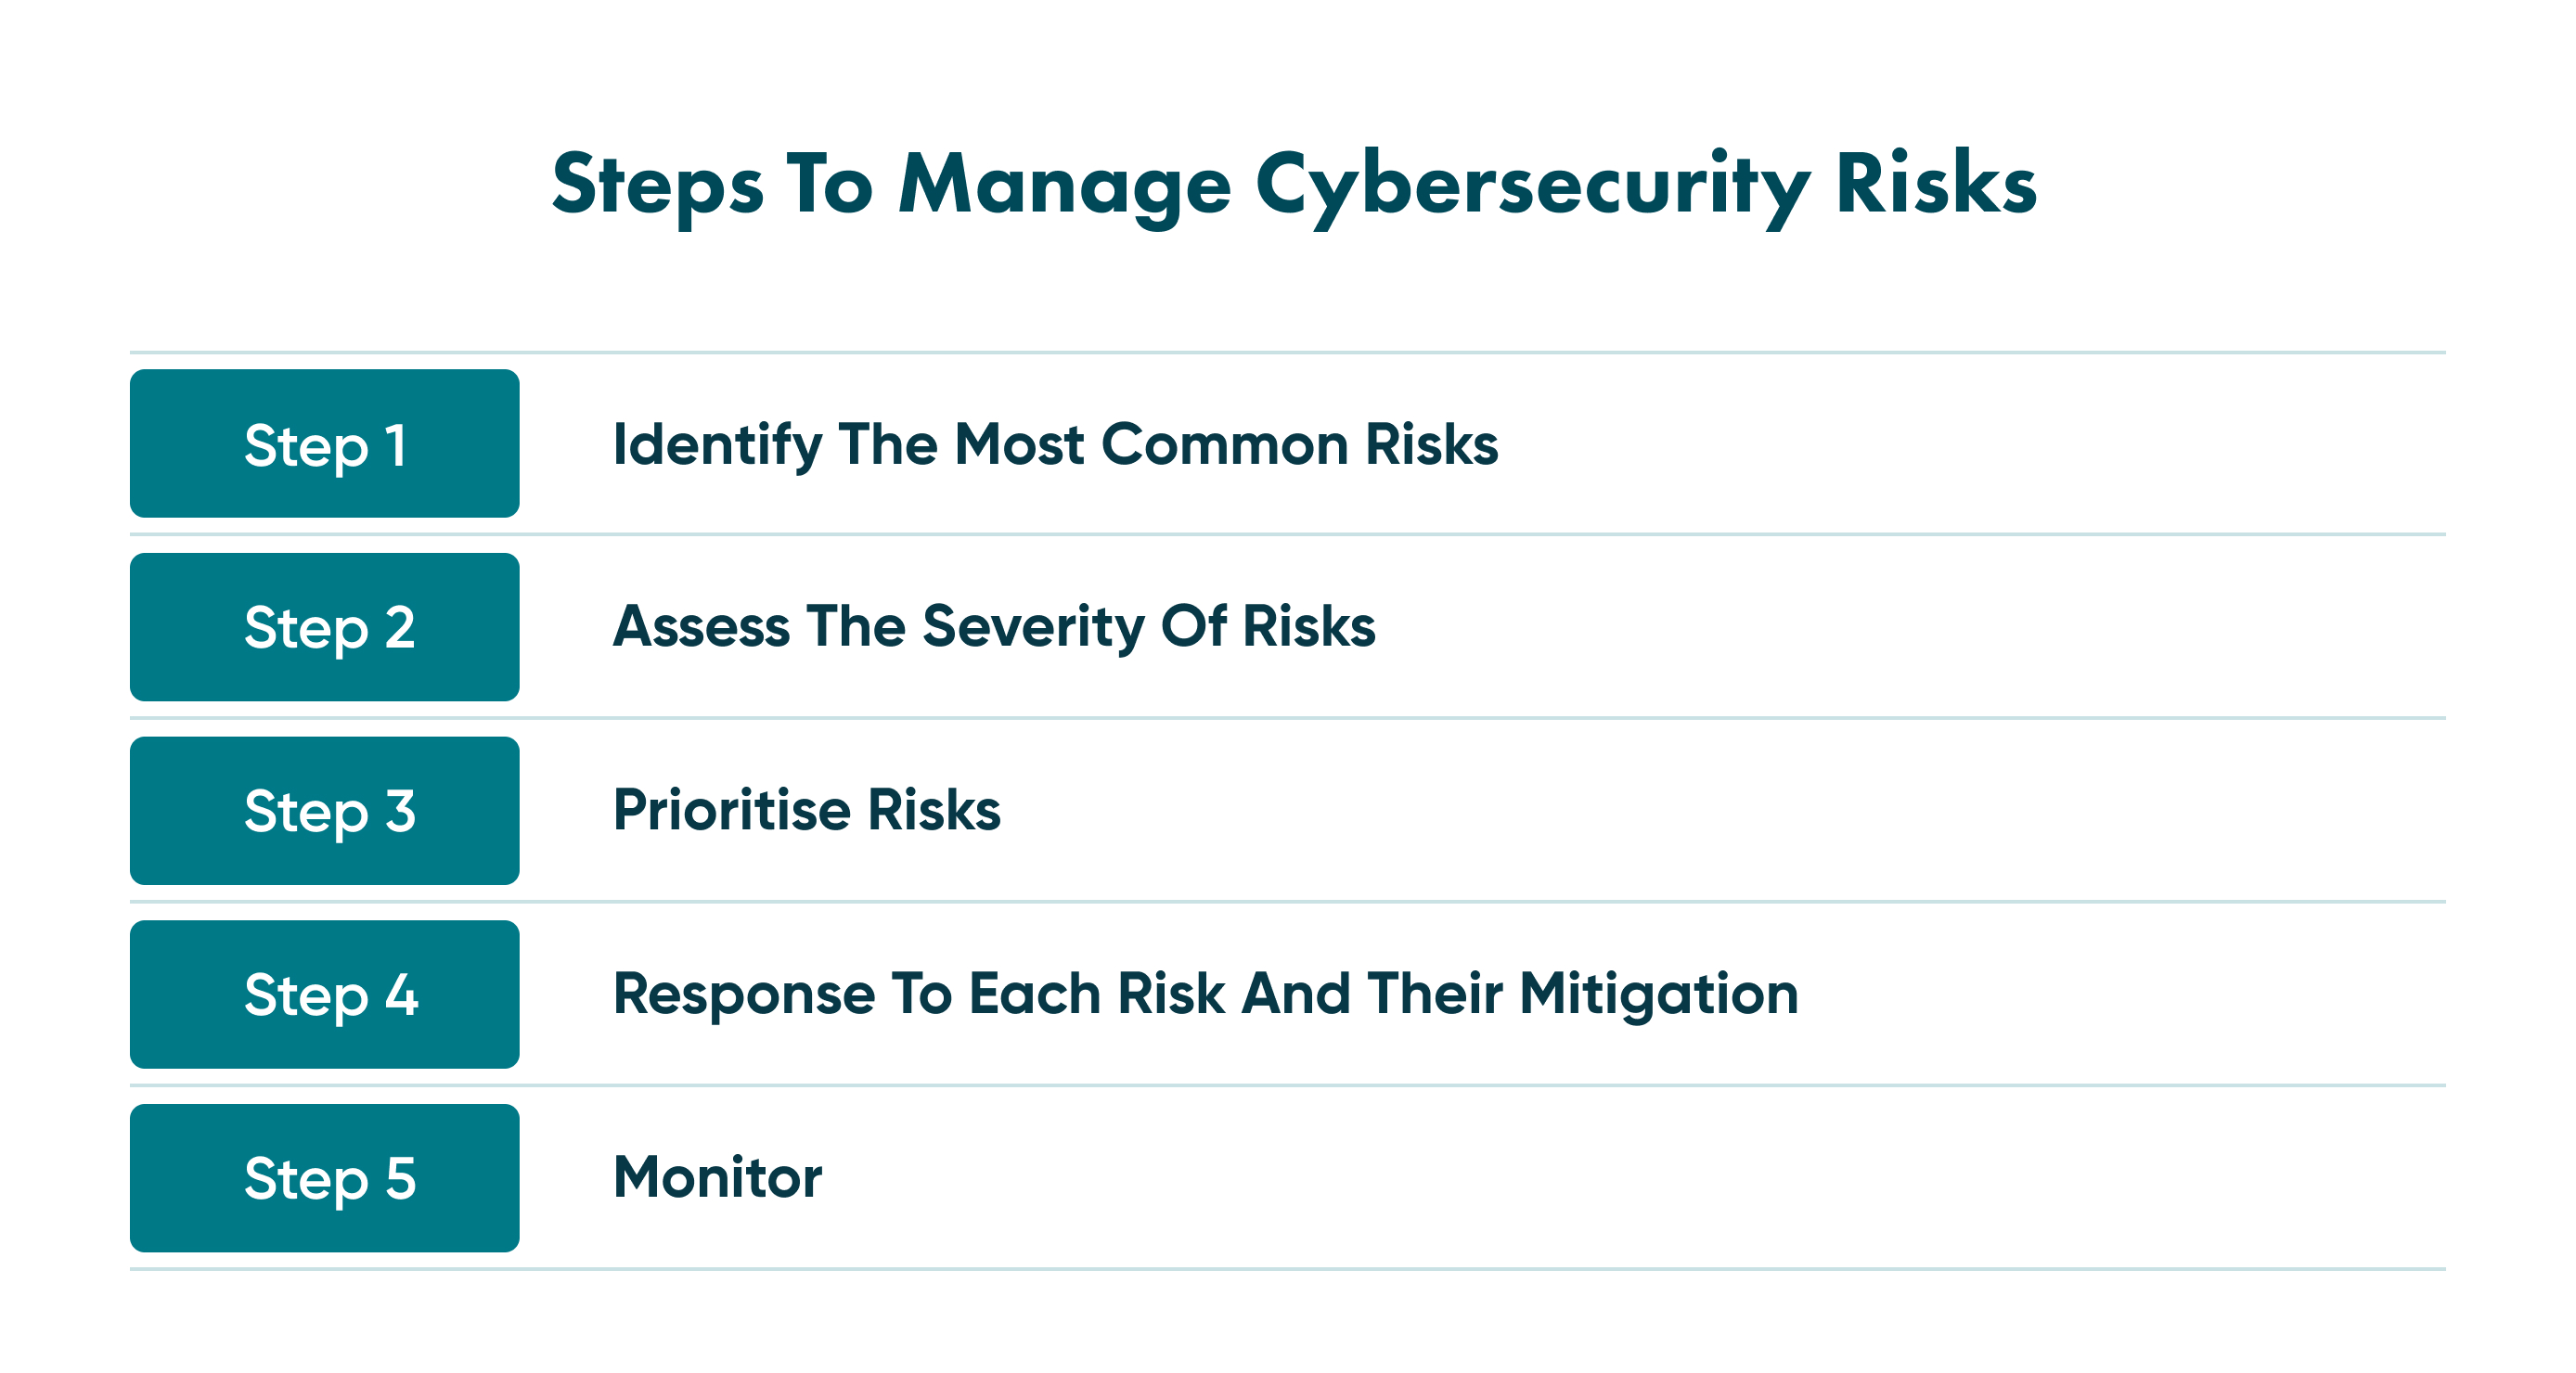 The risk management process in cybersecurity is time-consuming and challenging, so you need to know all the steps to do it appropriately.